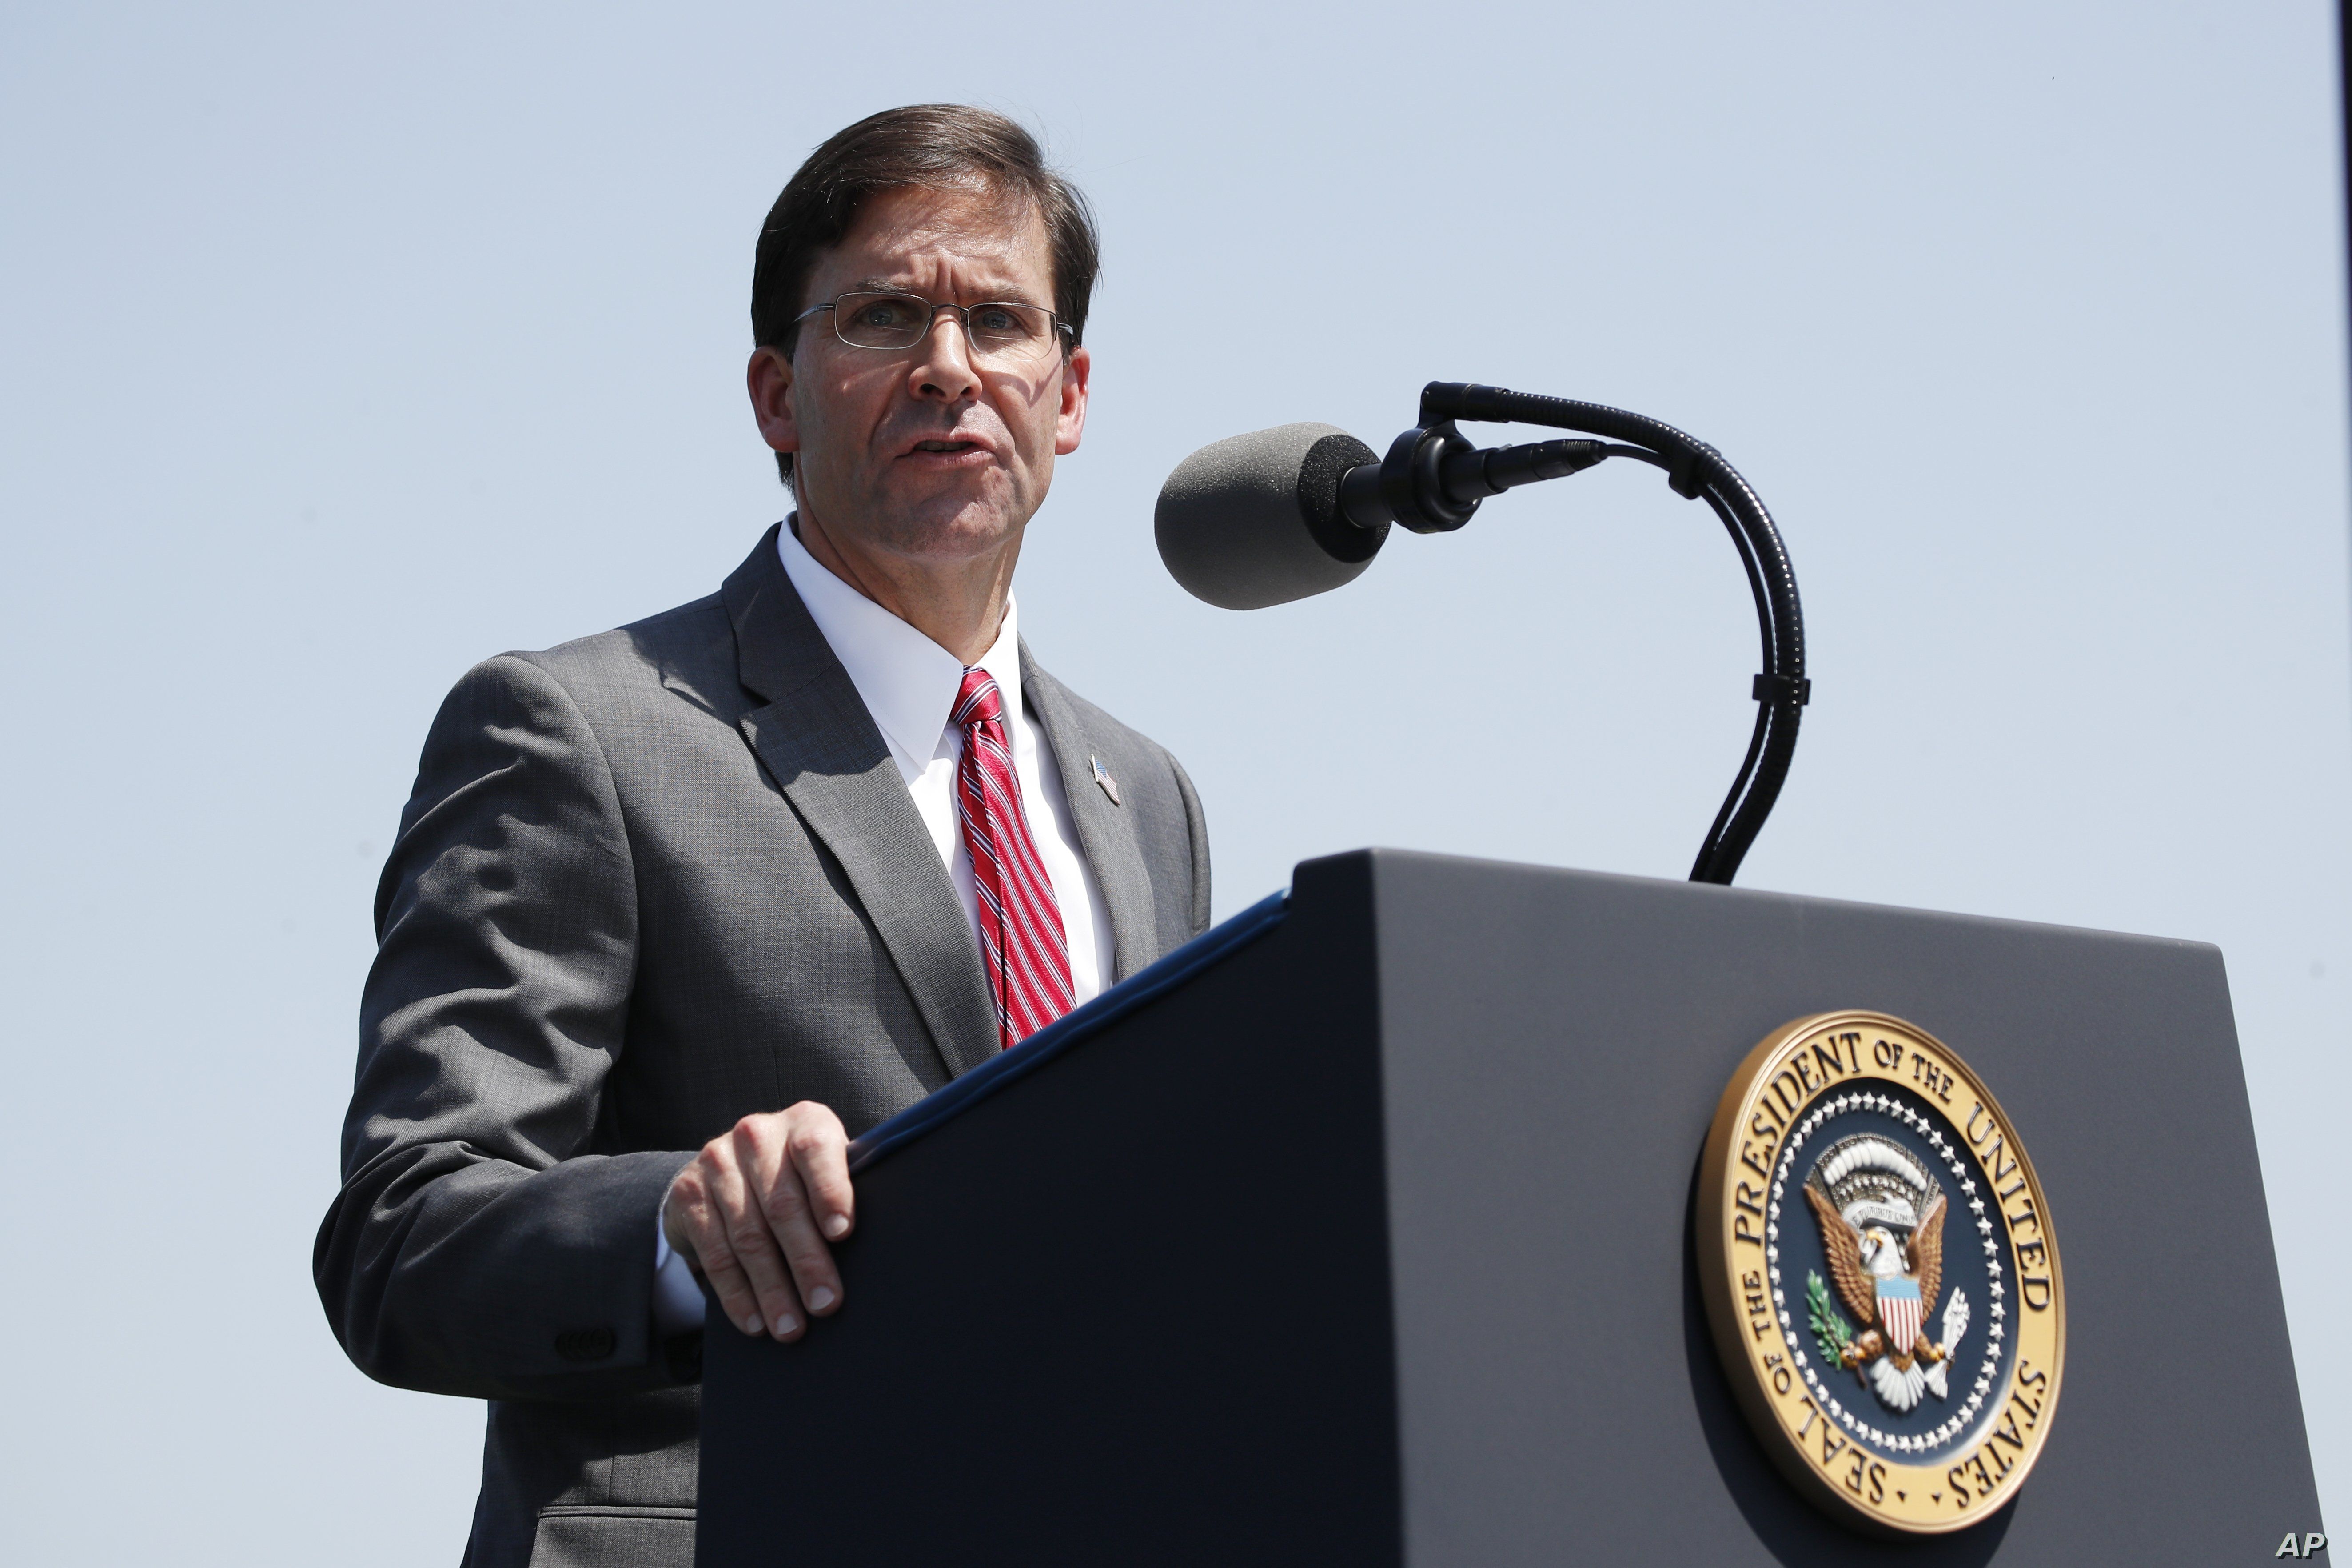 Secretary of Defense Mark Esper speaks during a full honors welcoming ceremony for him at the Pentagon, July 25, 2019.